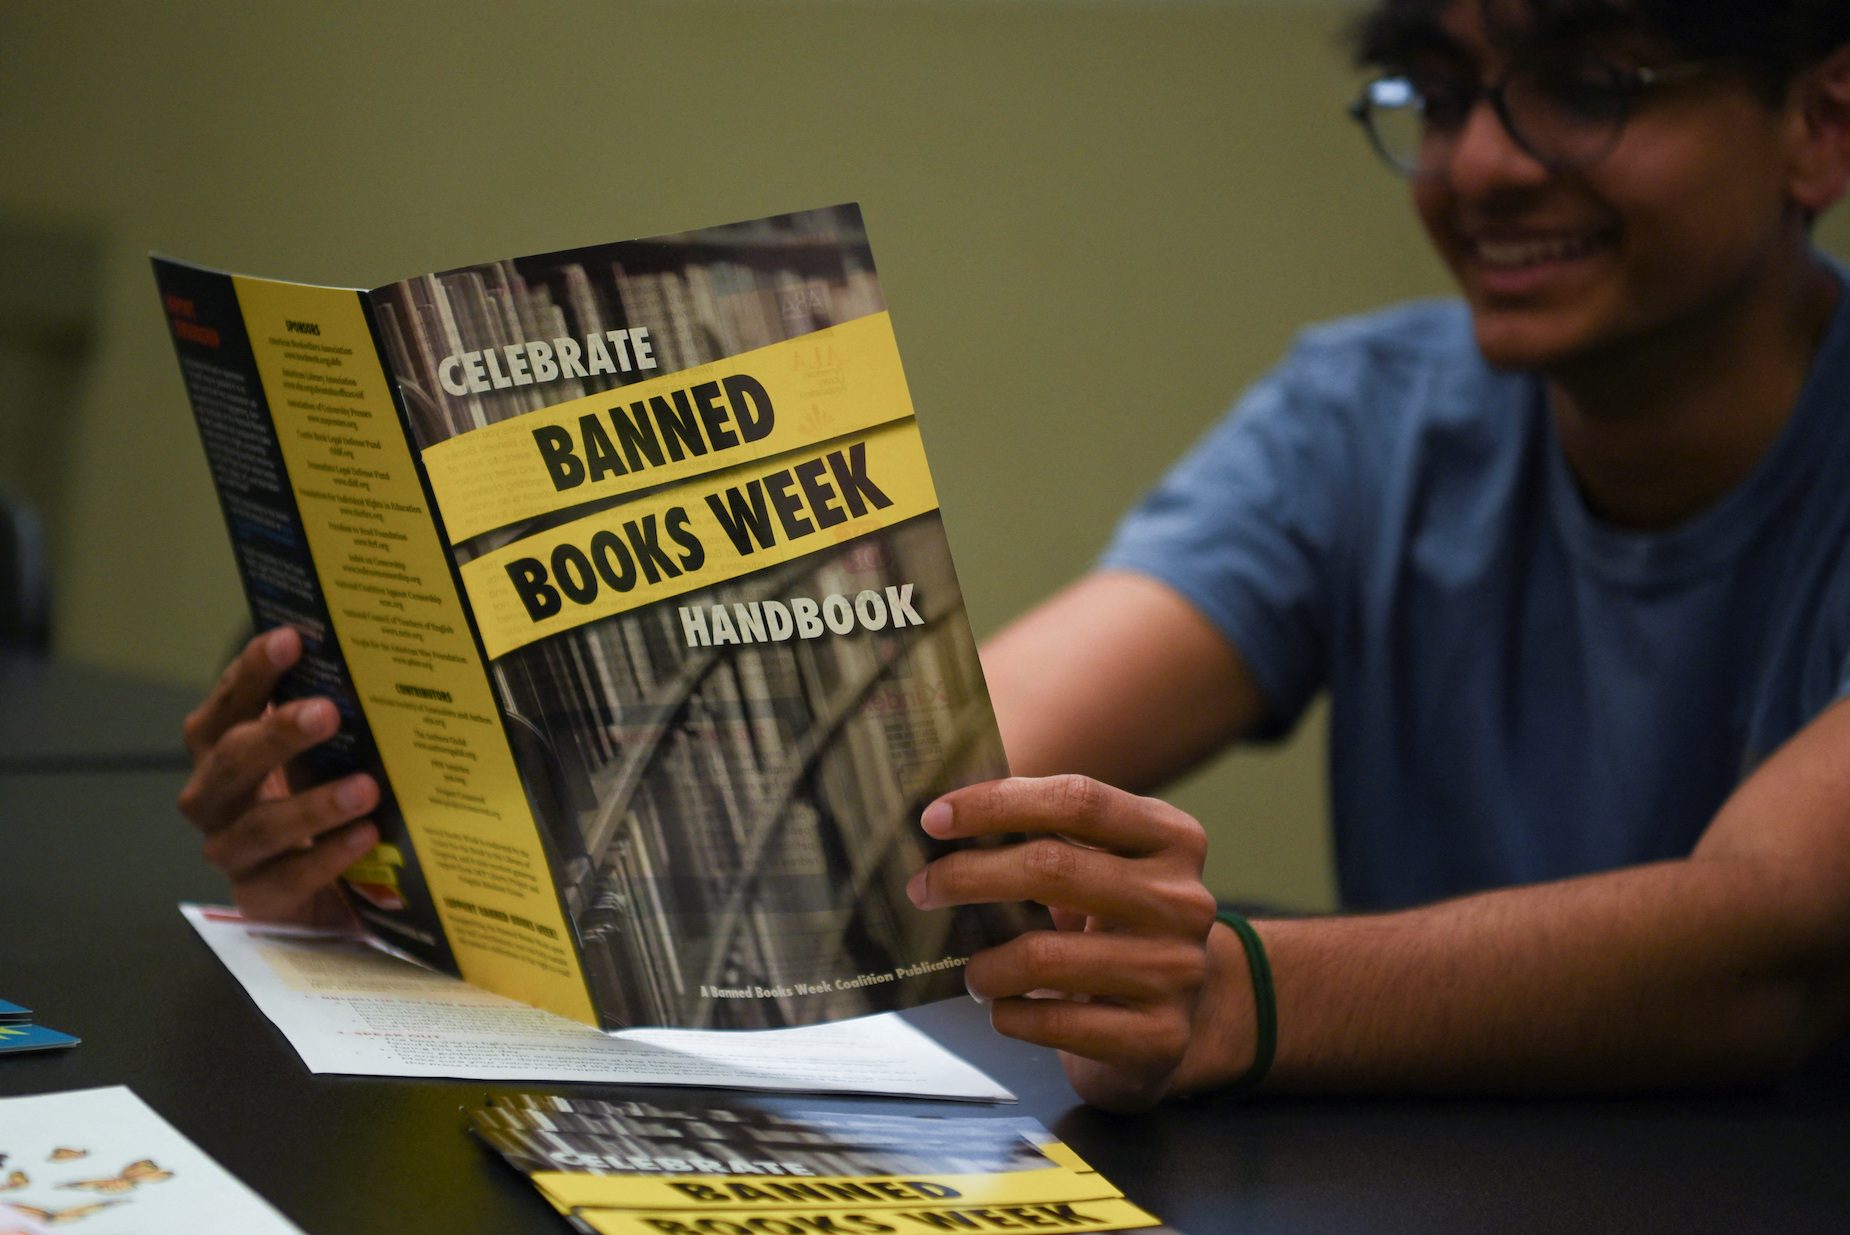 Texas county keeps libraries open amid fight over banned books